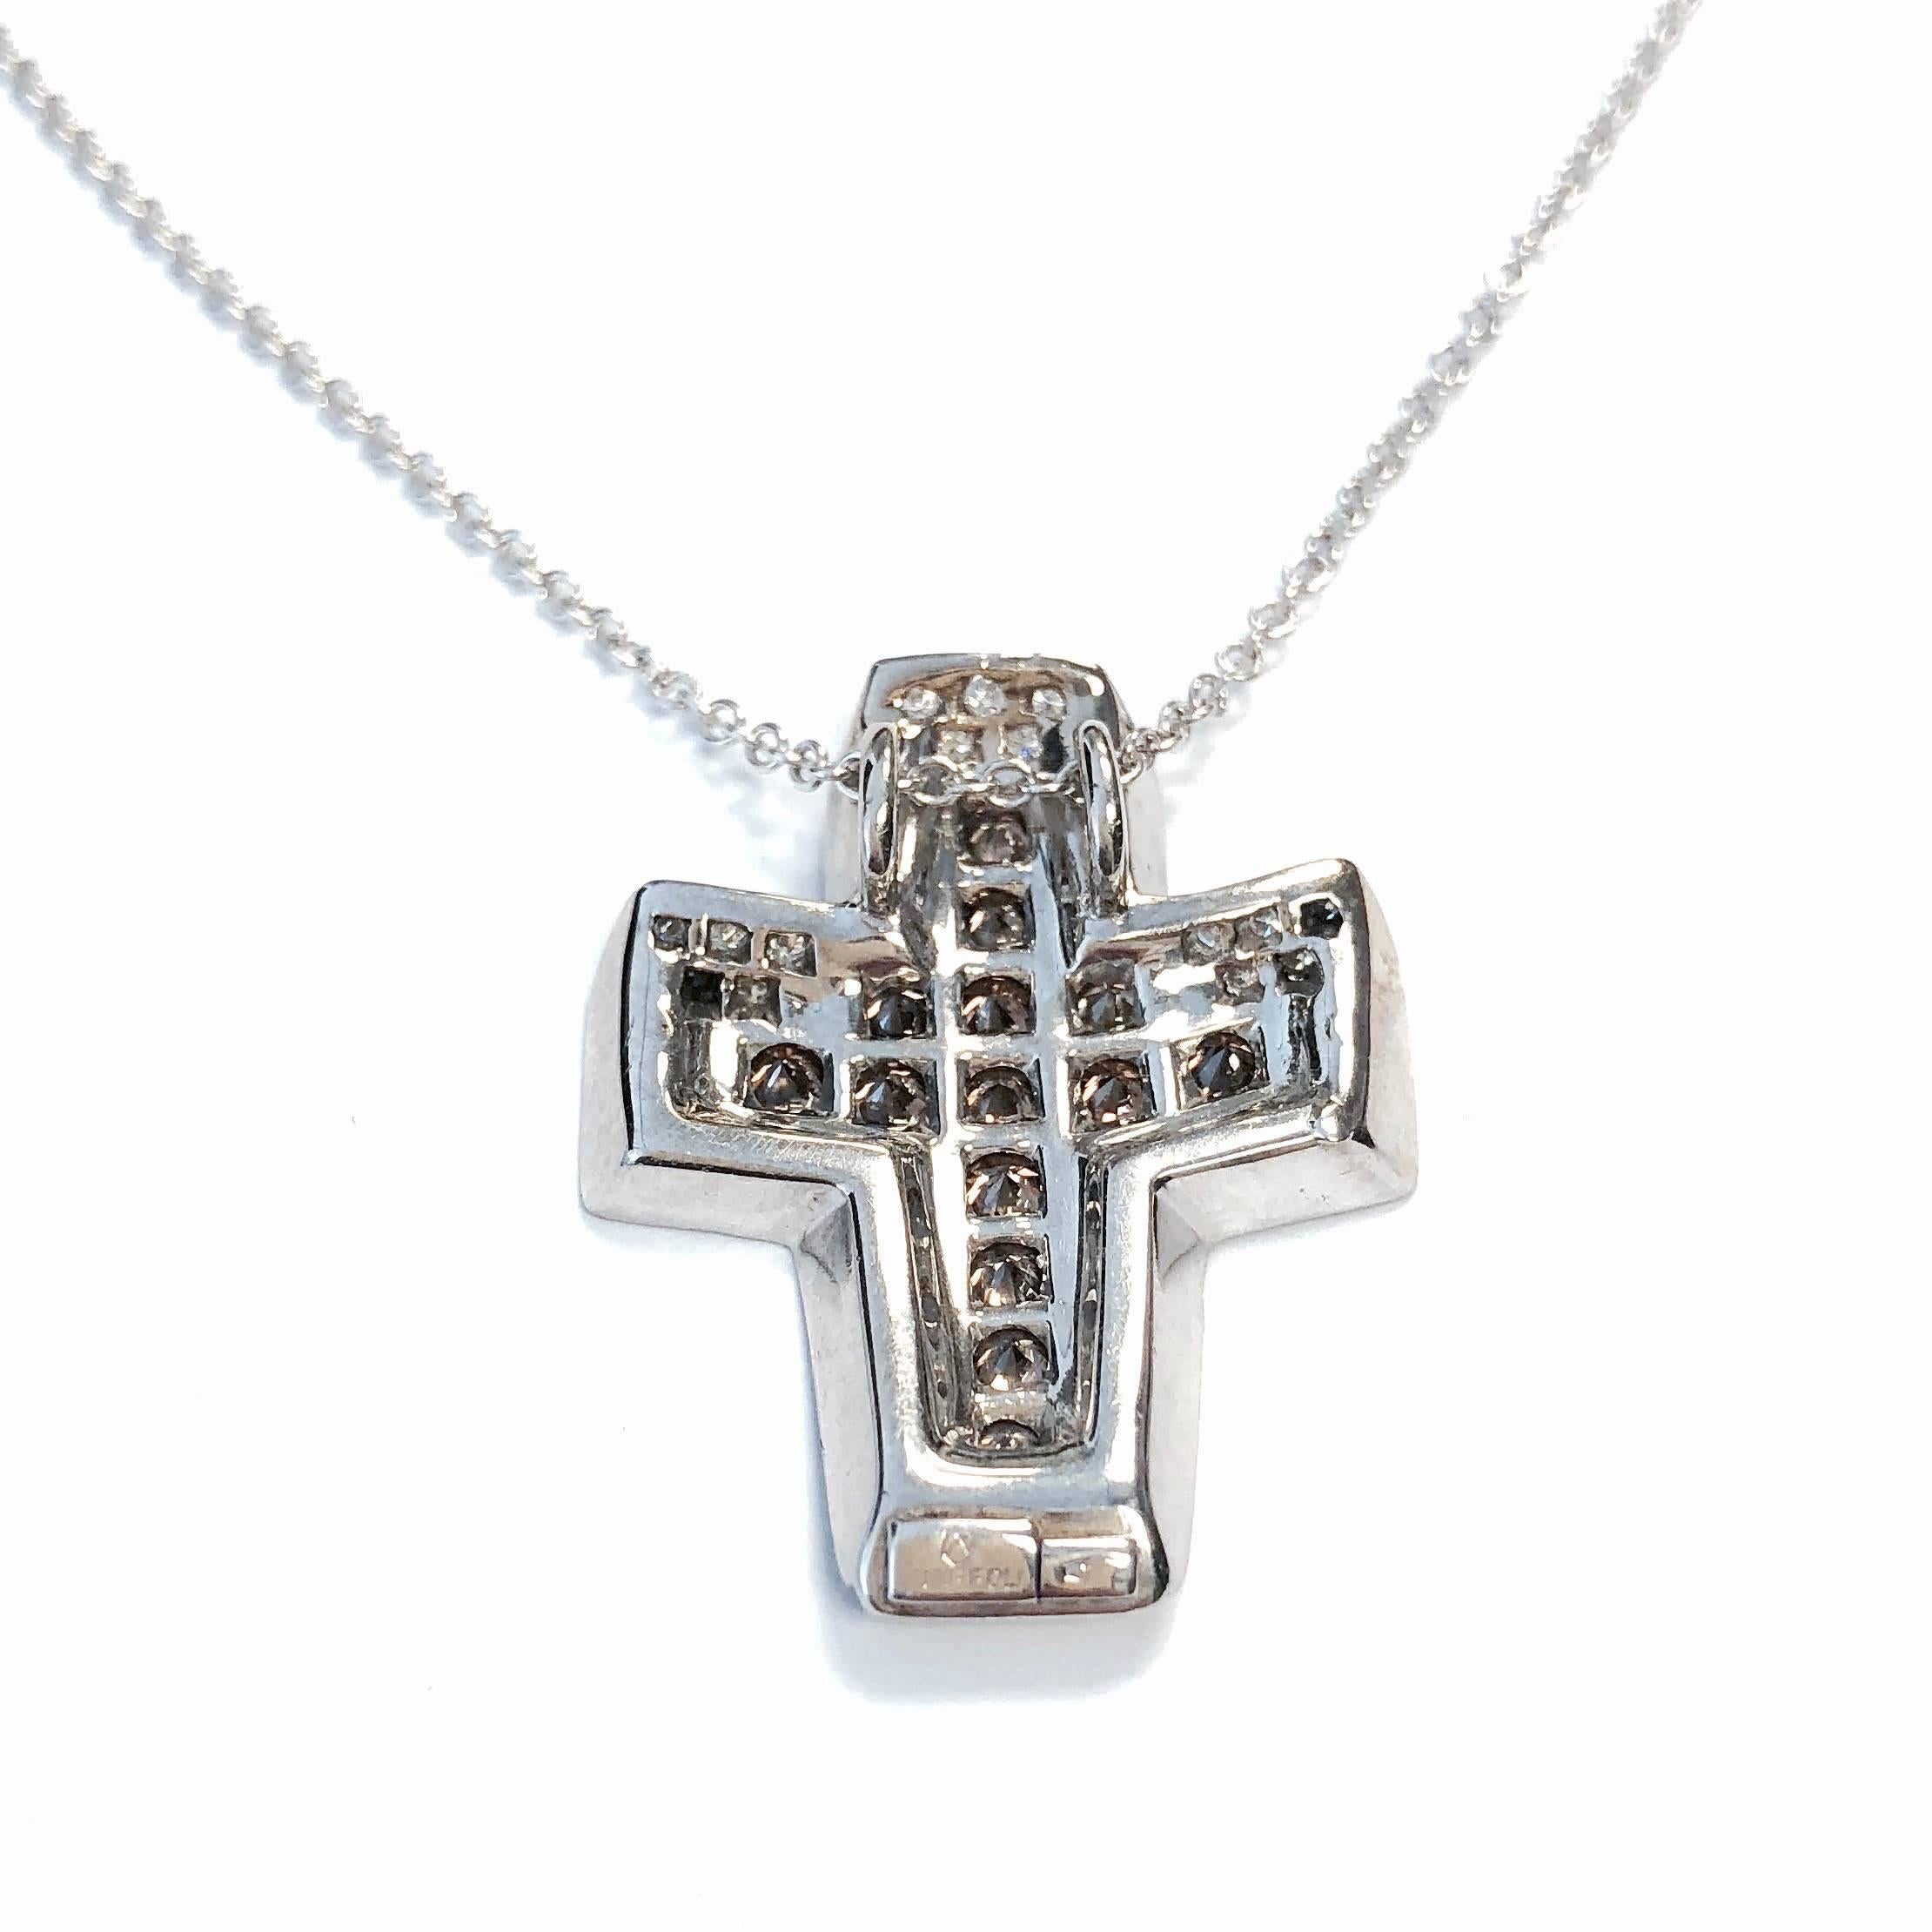 From the famous house of Andreoli, featuring a curved 3 dimensional cross design. The pendant is crafted in 18K white gold and set with 56 round brilliant cut diamonds, approximate total weight of 3.00 carats. Color: F-G for white diamonds and light